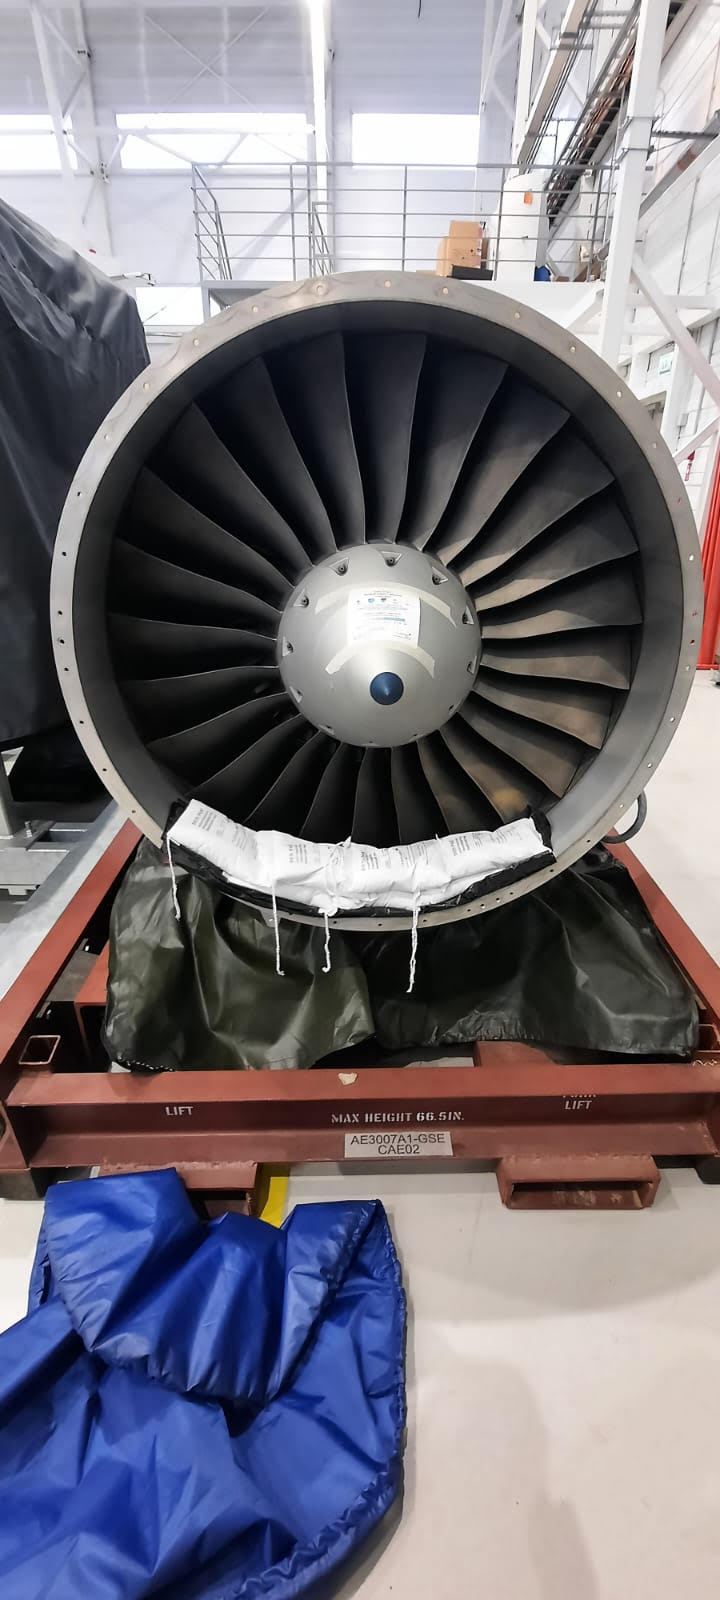 We have available two Rolls Royce AE3007-A1E engines for immediate sale. The units were removed from an Embraer Legacy 600.